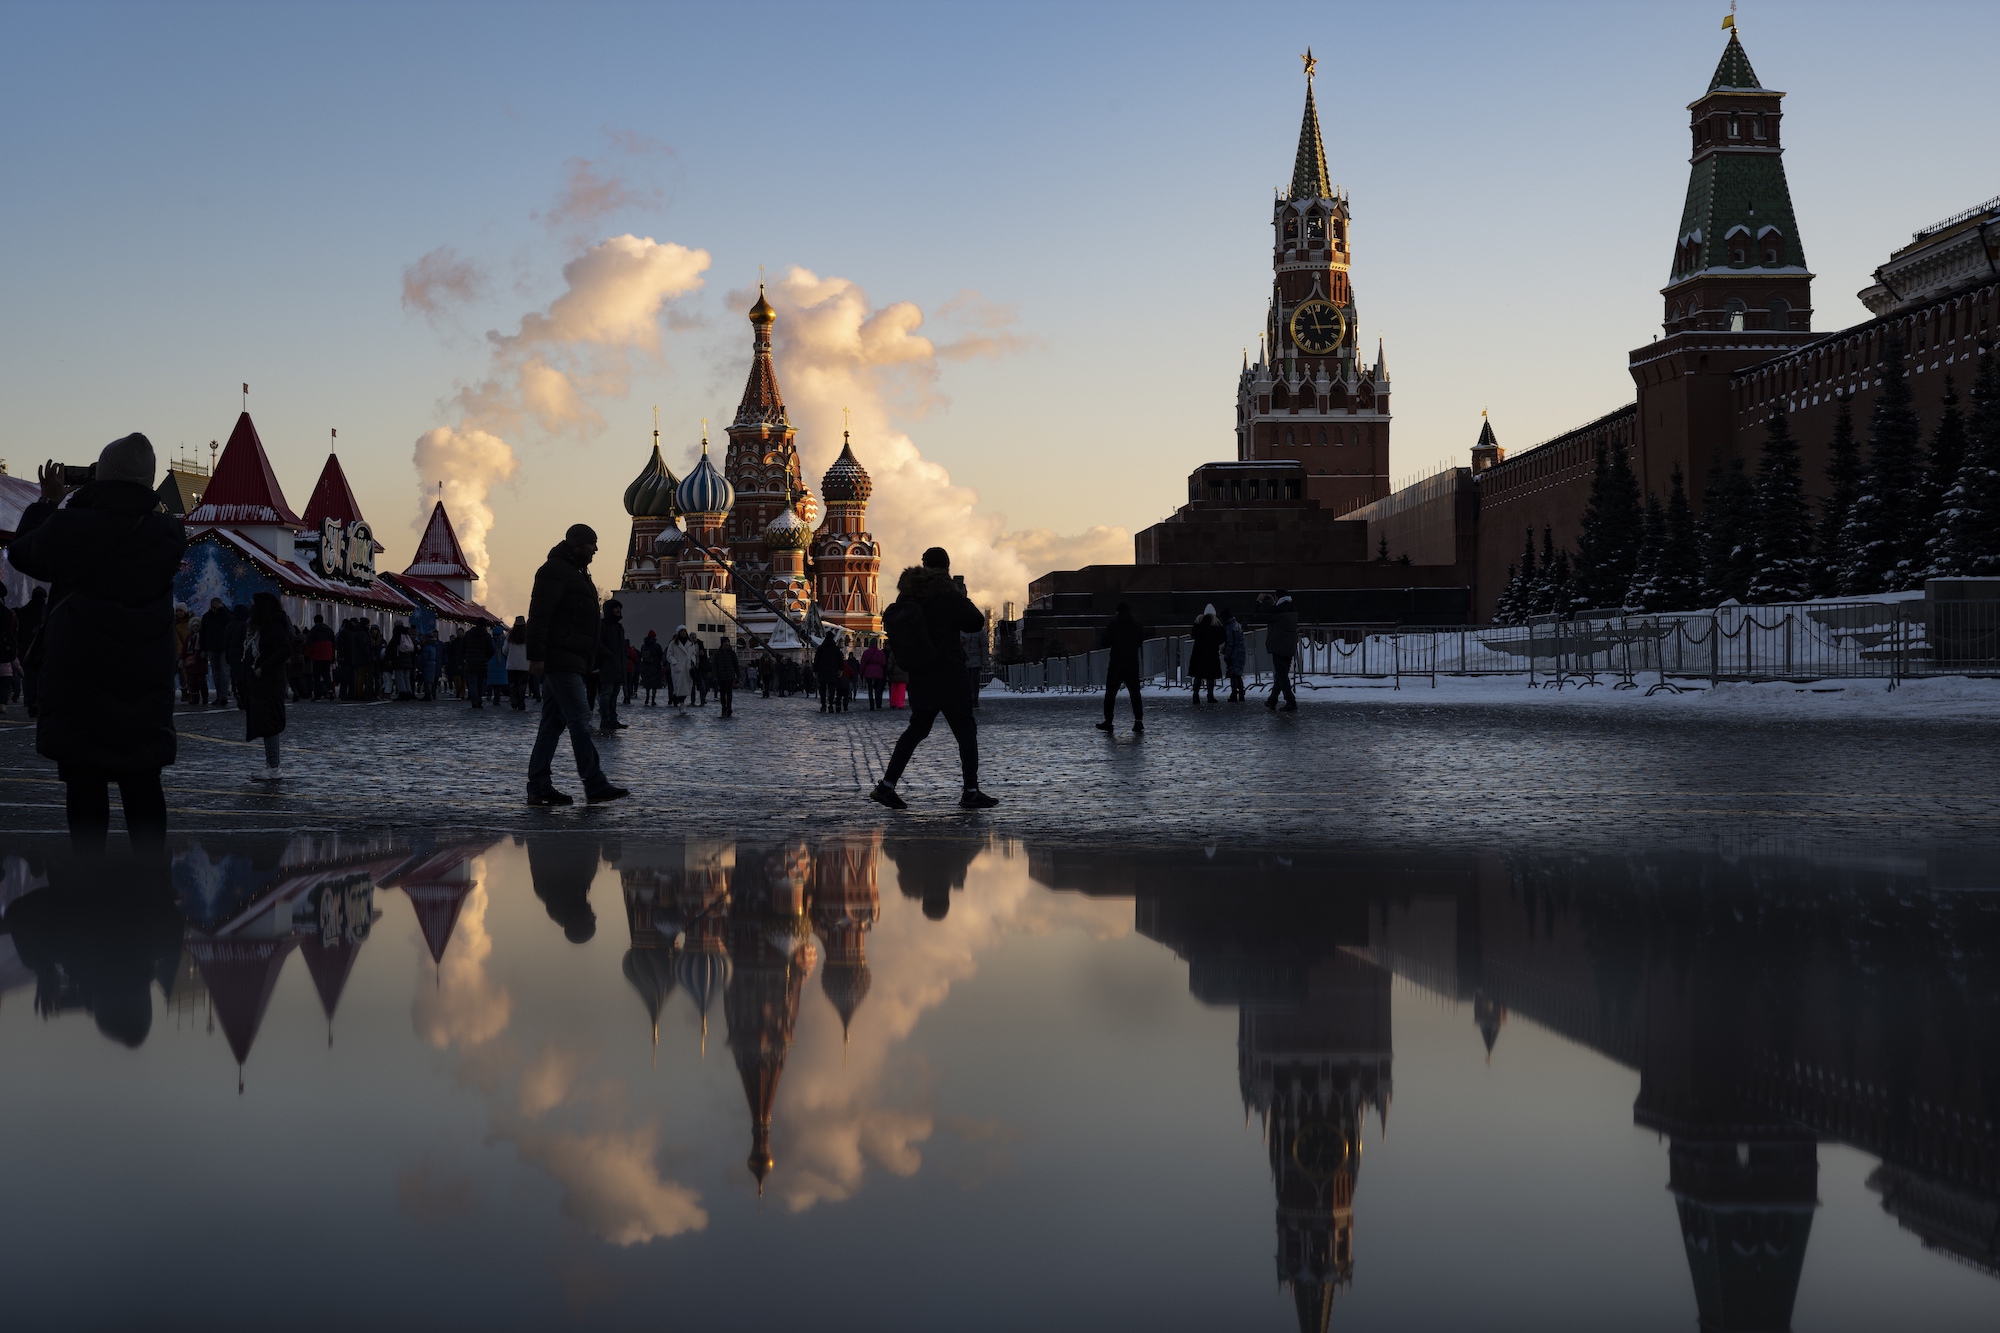 People walking in Moscow's Red Square are reflected in a puddle on the ground